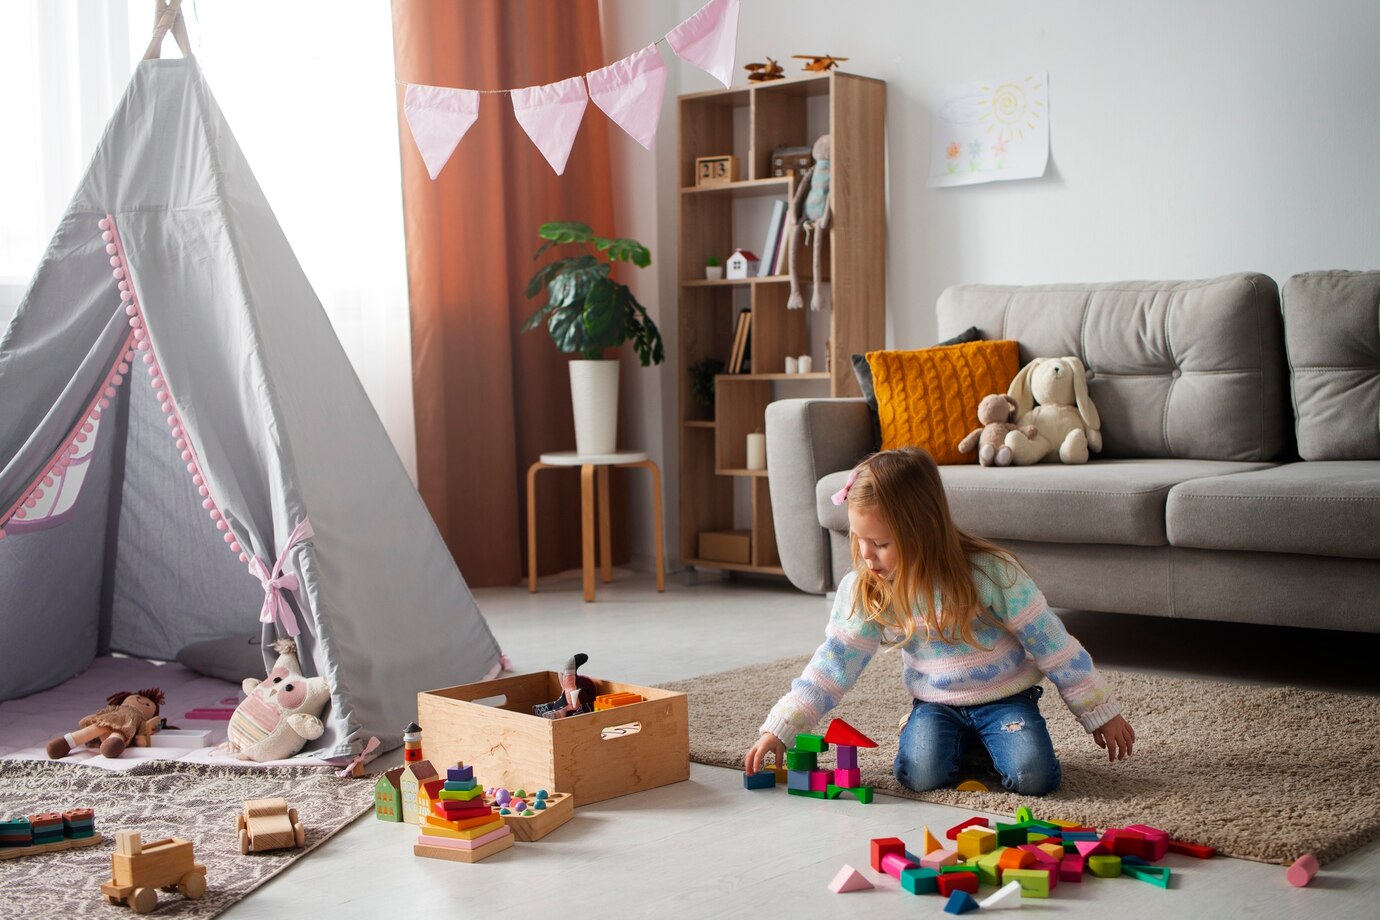 Creating a Dreamy Child’s Room: Design, Color Selection, and Decorative Items